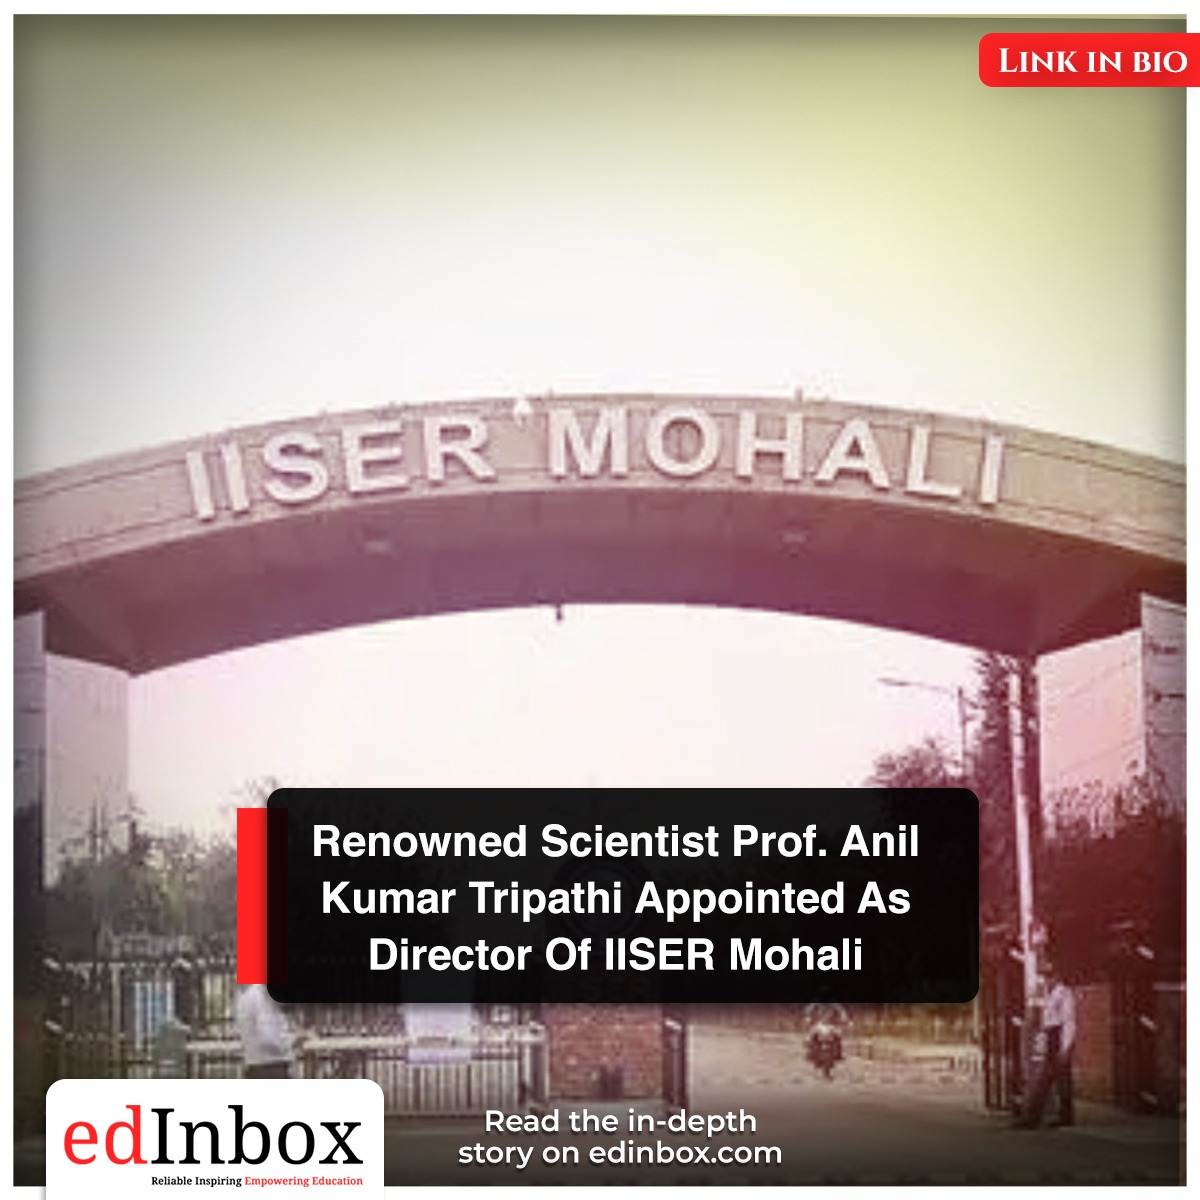 With a track record of supervising 22 #PhD theses and leading several research #projects , Prof. Tripathi's appointment is poised to catalyze advancements in scientific research and #education  at #IISER Mohali.